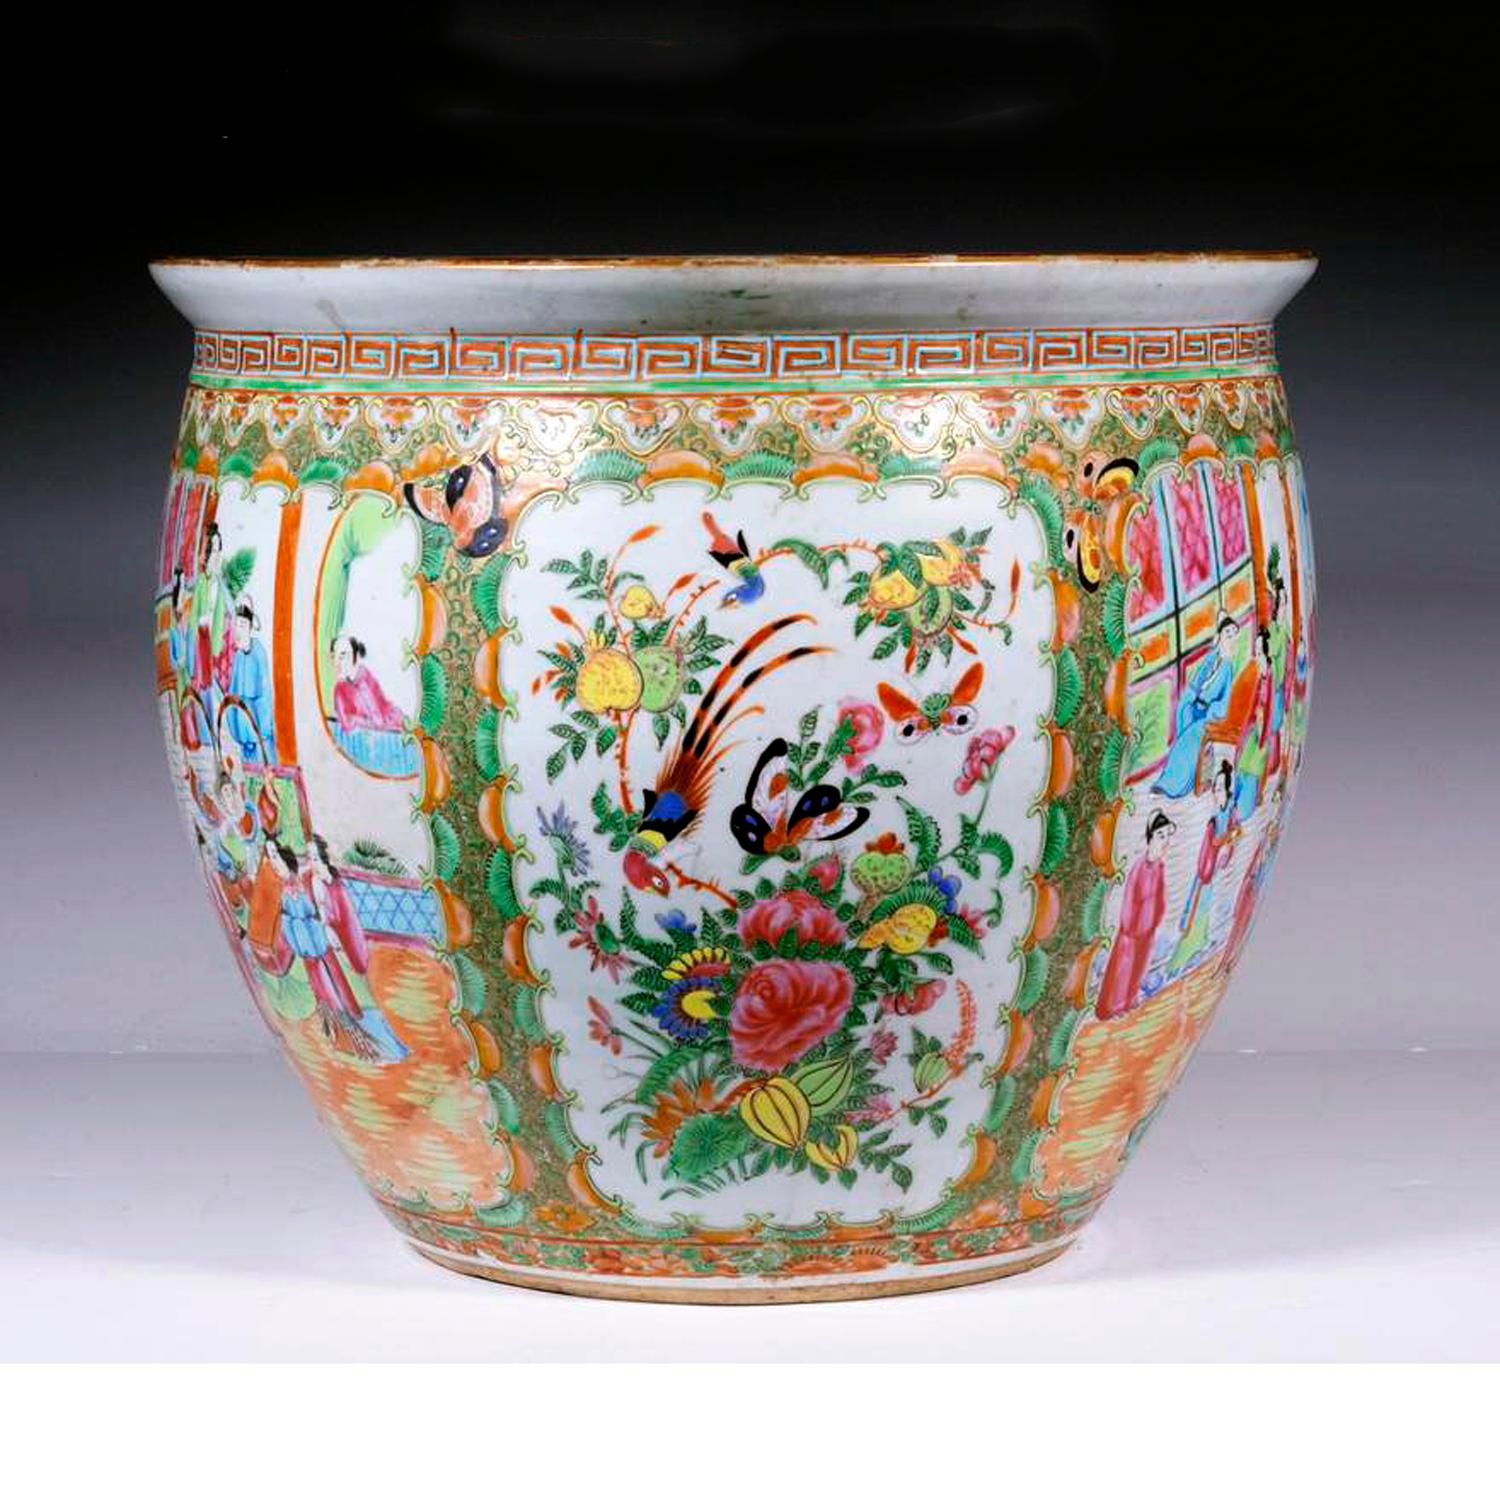 19th Century Chinese Export Porcelain Rose Medallion Fish Bowl or Jardiniere